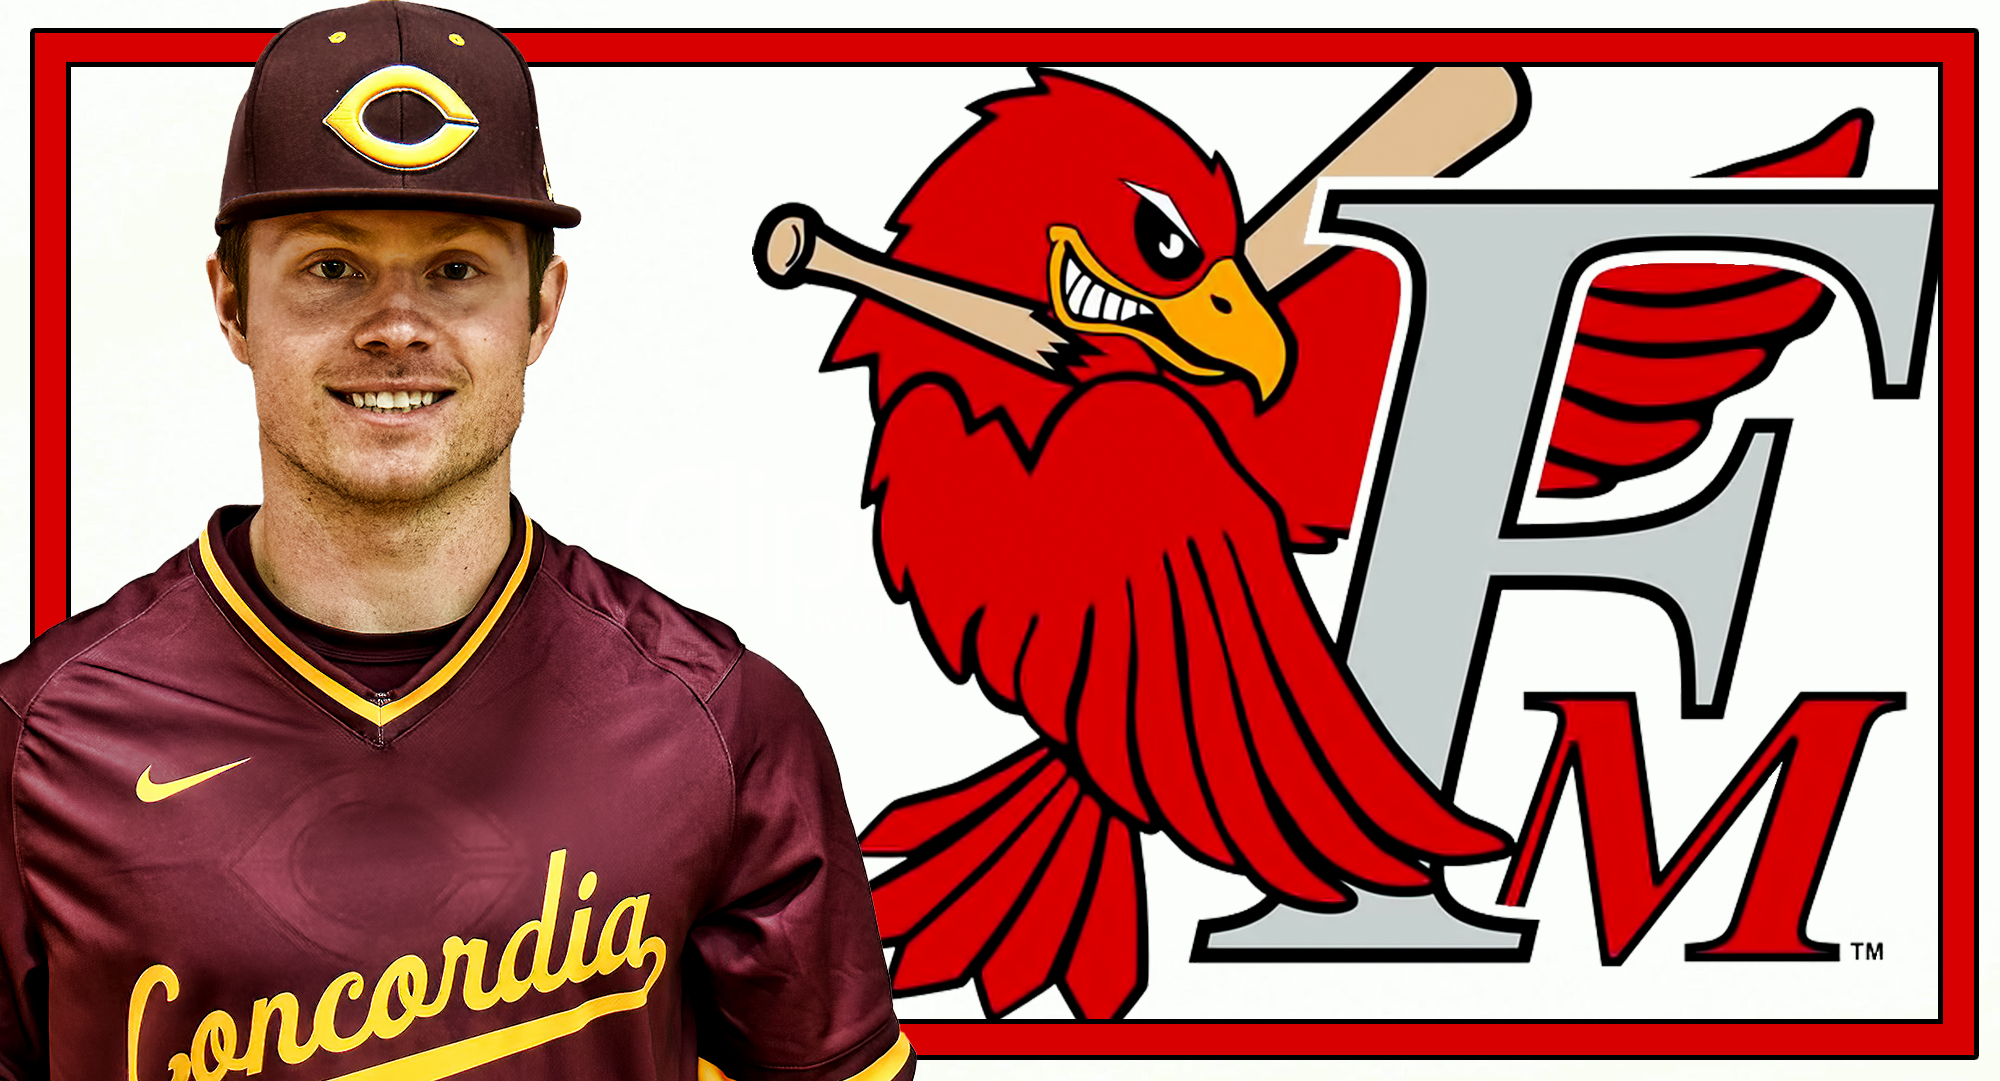 Former Cobber Andy Gravdahl signed a professional contract with the F-M RedHawks of the American Association on Thursday, June 22.